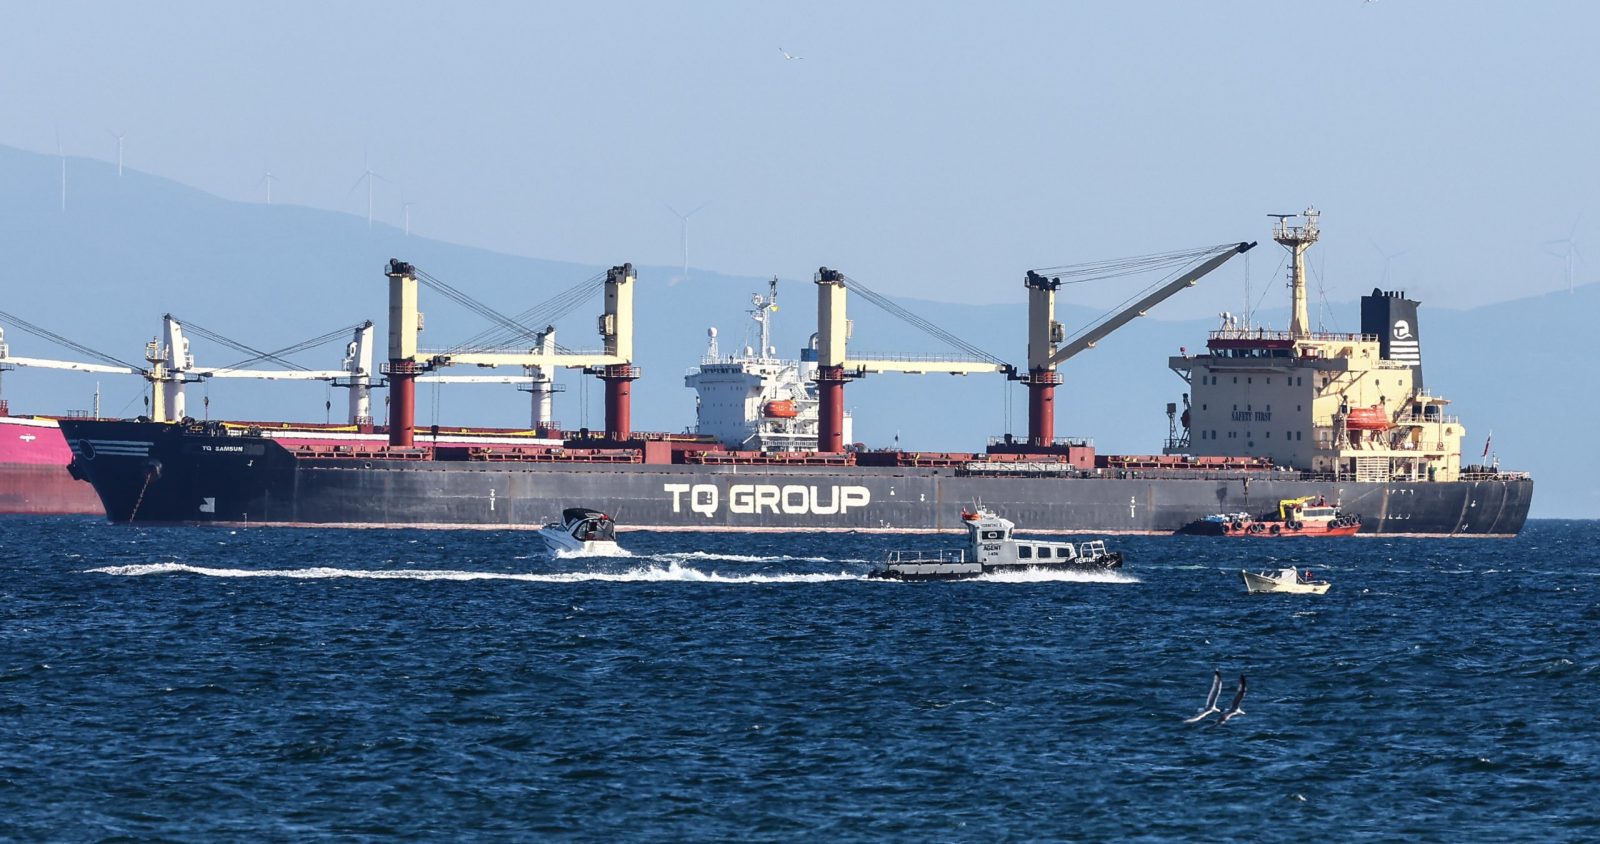 epa10754107 The Turkey flagged TQ Samsunhe, the last grain ship that left a Ukrainian port since Russia exit the Grain Corridor Agreement one day earlier, is seen in the Marmara Sea, in Istanbul, Turkey, 18 July 2023. Russia announced that it withdrew from the Grain Corridor Agreement, which started in July one year earlier, because the barriers to the sale of its own food products were not removed. The agreement had been signed with Russia and Ukraine at the initiative of Turkey and the UN. UN Secretary General Gutterez in a statement on 17 July expressed his disapointement about Russia's withdrawal from the agreement as this decision puts at risk global food security.  EPA/SEDAT SUNA